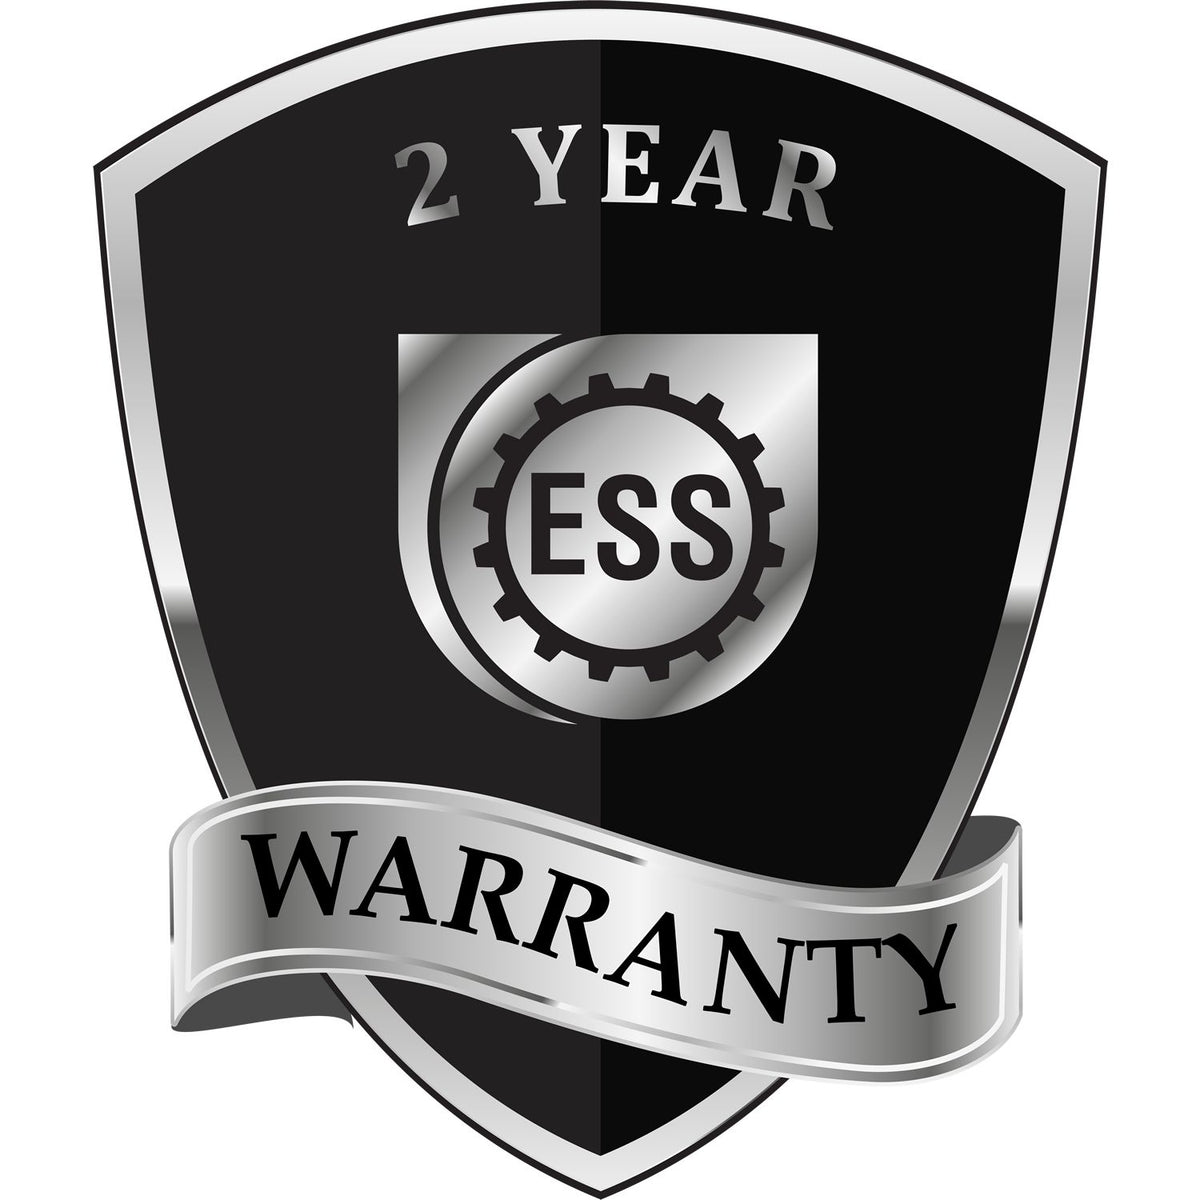 A badge or emblem showing a warranty icon for the Extended Long Reach New York Architect Seal Embosser